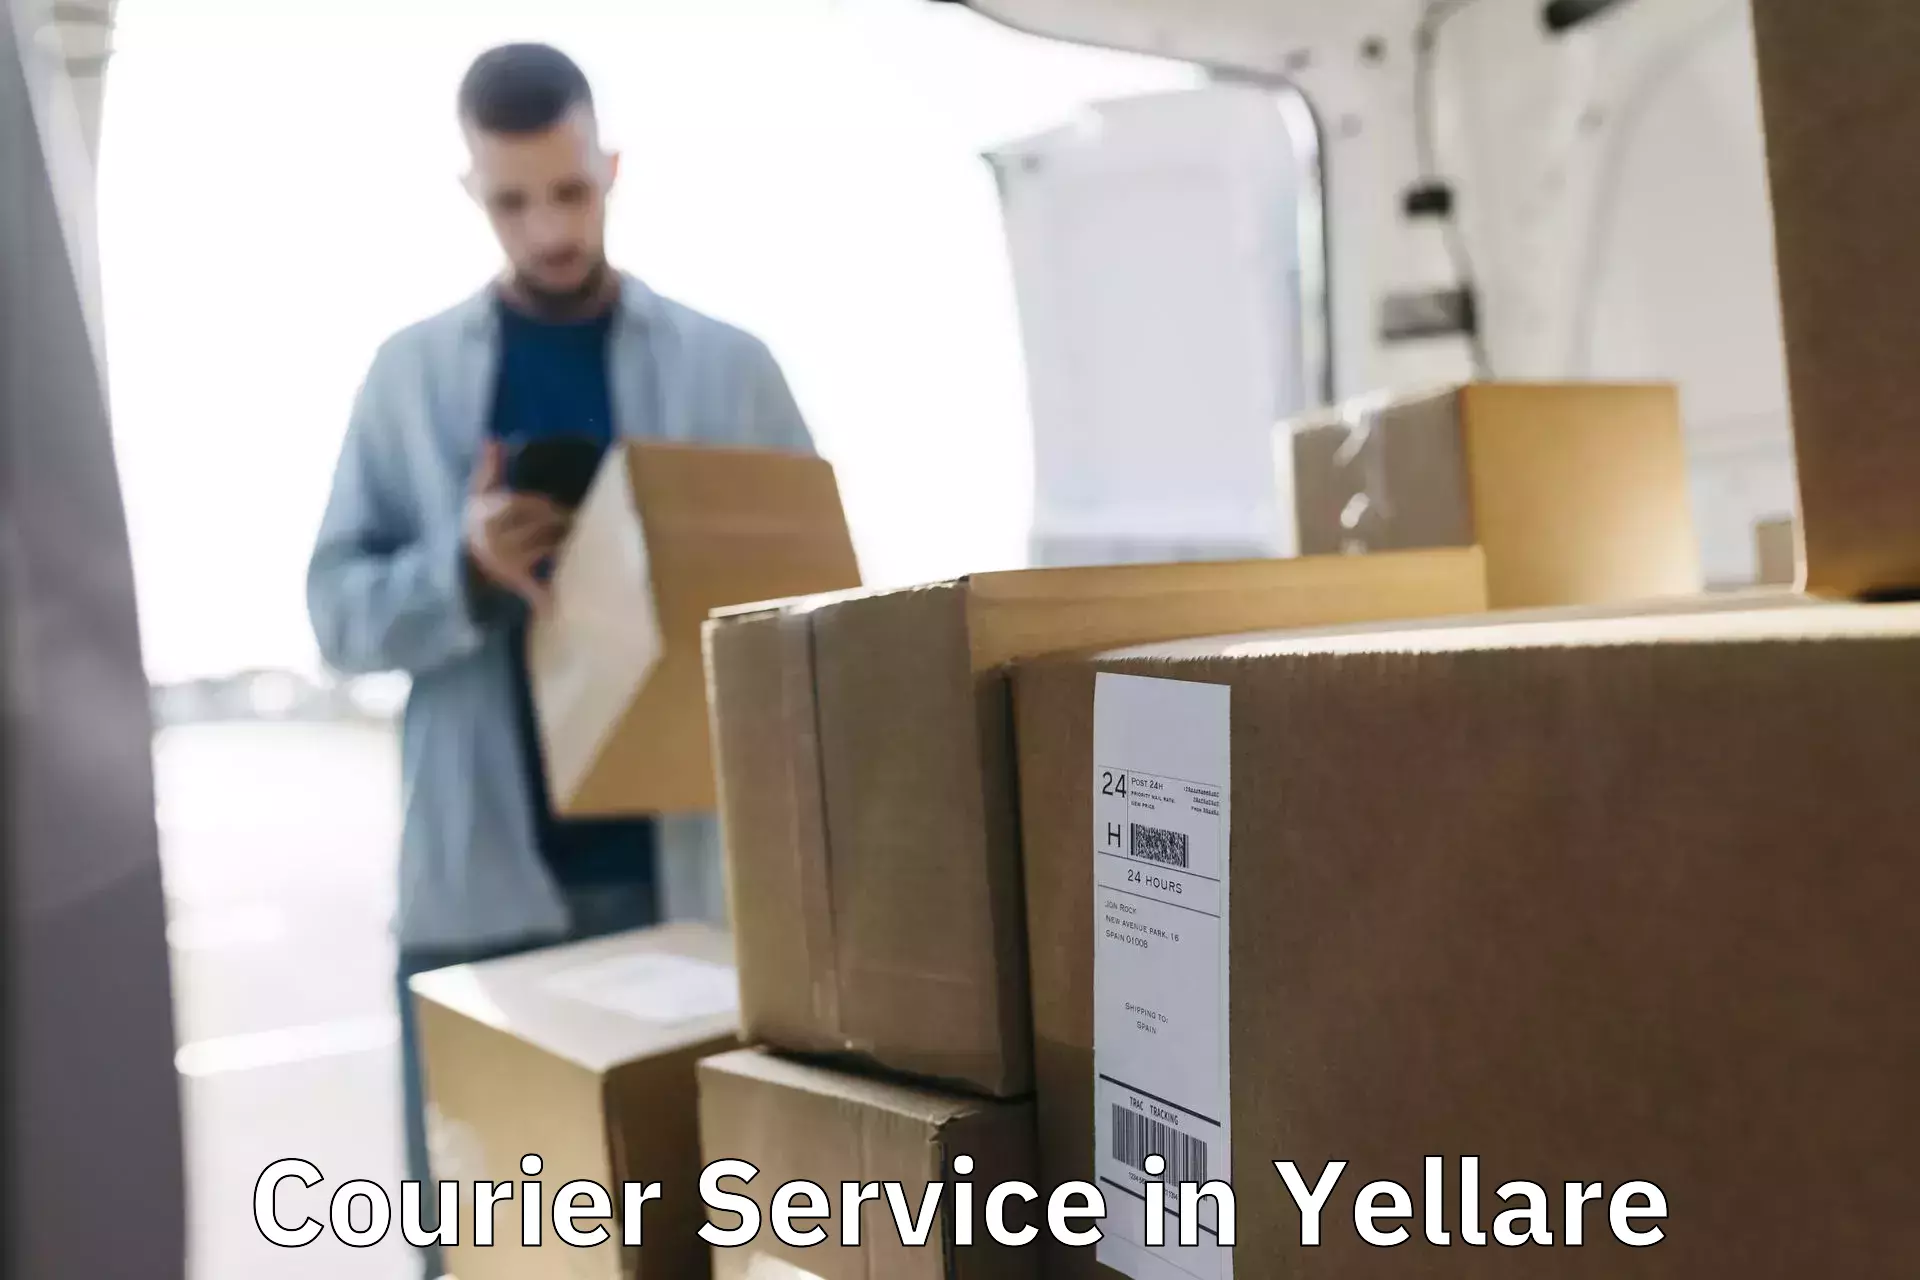 24-hour delivery options in Yellare